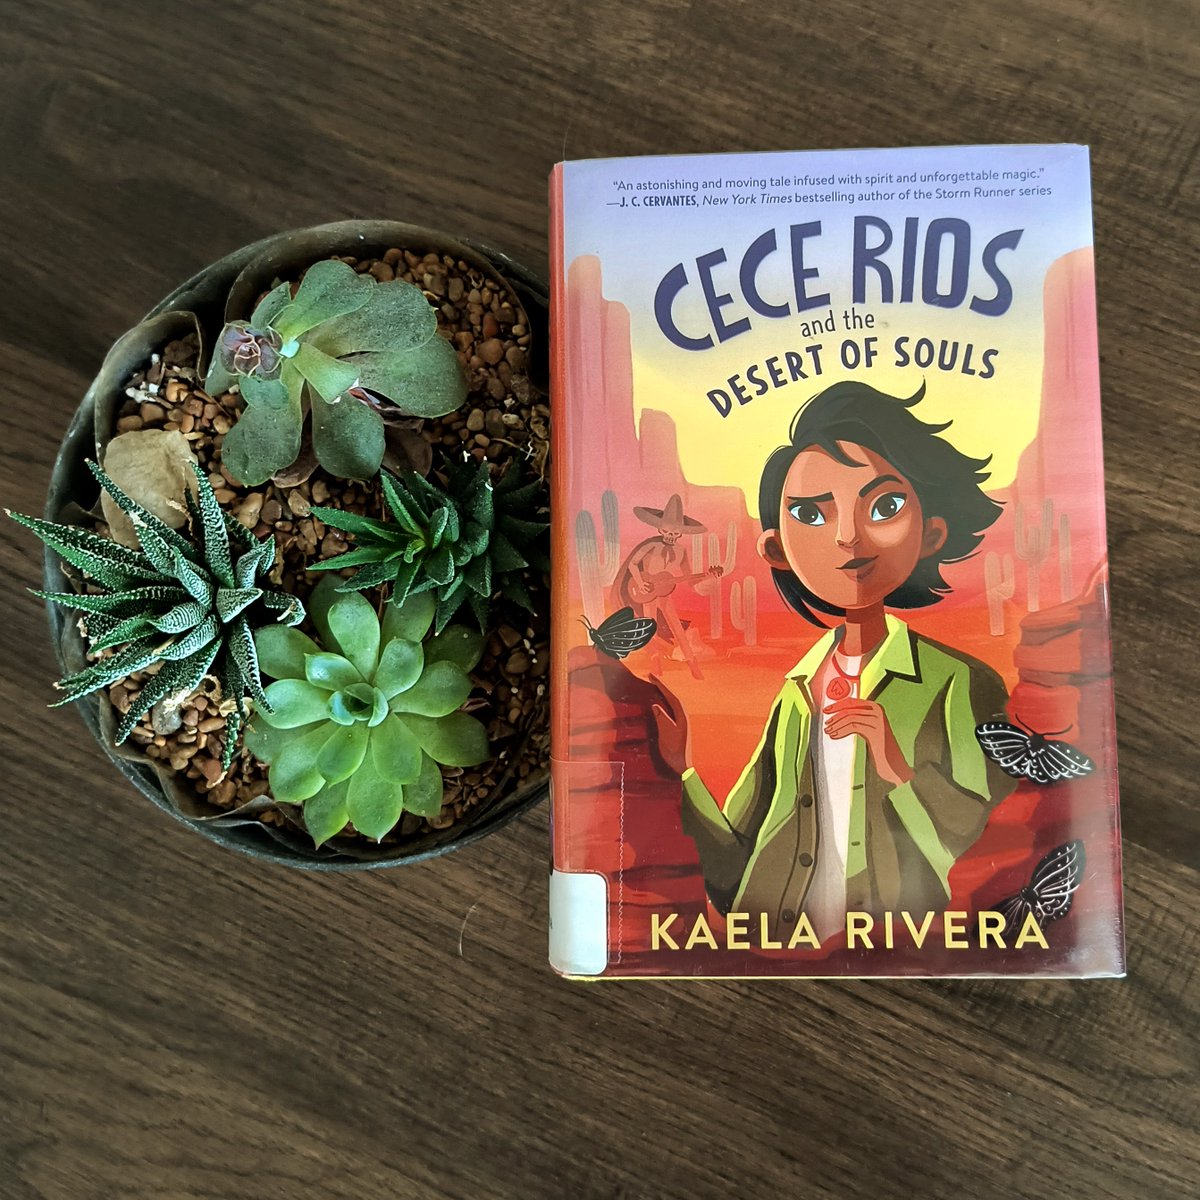 I always try to read something by the #LTUE Guest of Honor if I haven't already and wow—this is MG fantasy at its finest. I devoured it, my kid devoured it, we had a long conversation about the book in Pokemon terms. Looking forward to hearing Kaela Rivera next week at #LTUE42!